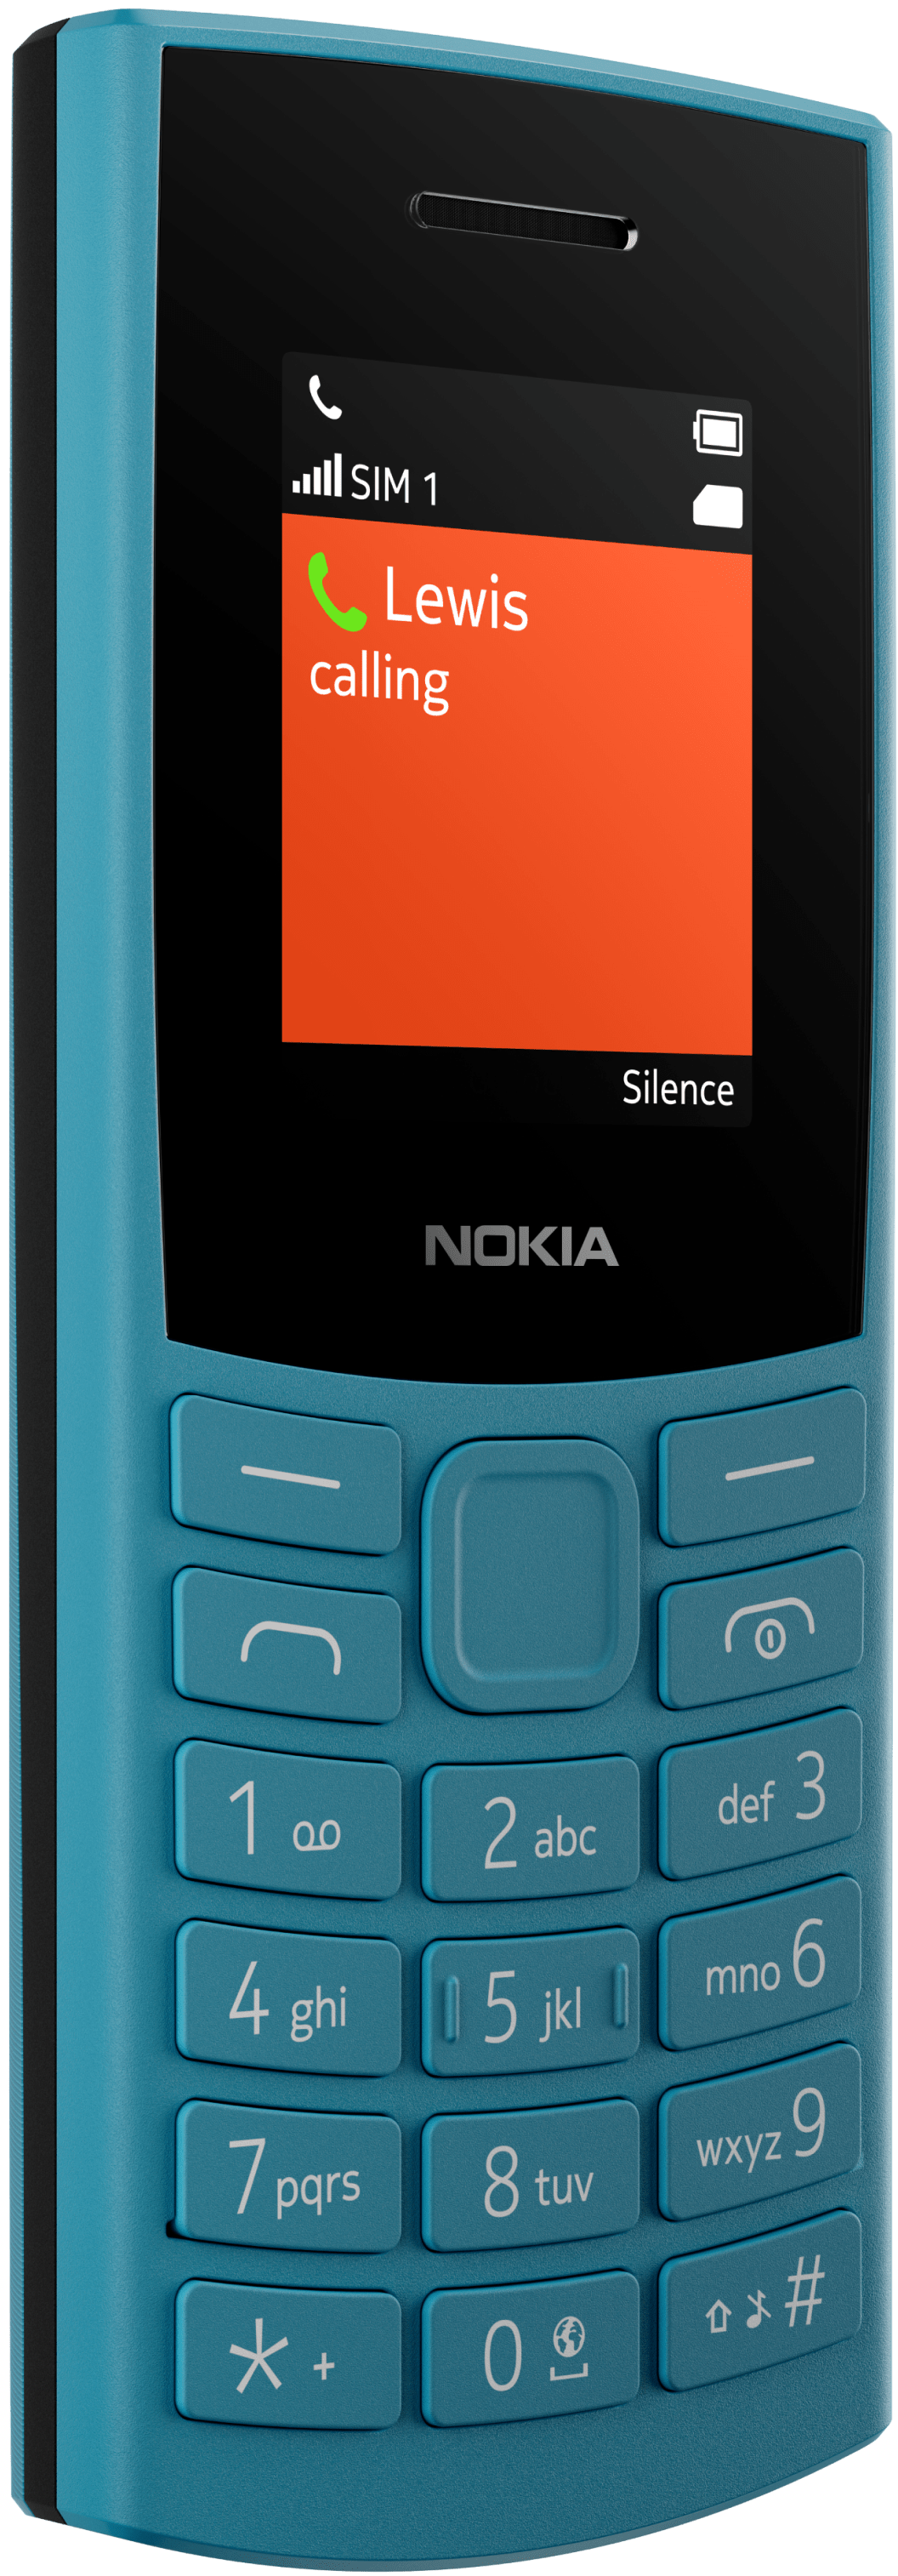 feature 105 internet with phone 4G Nokia